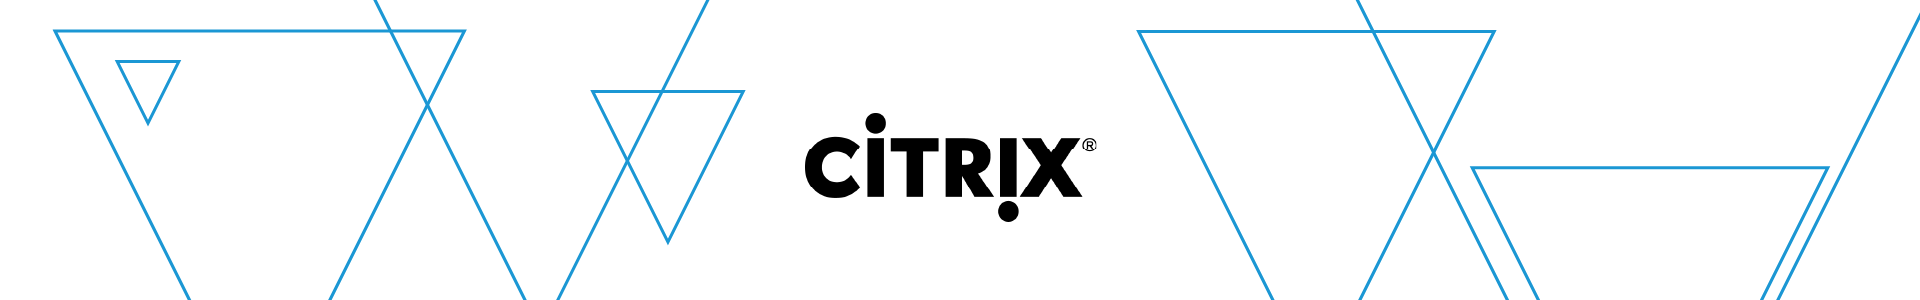 Citrix resellers zoom conferencing hardware magnifier download